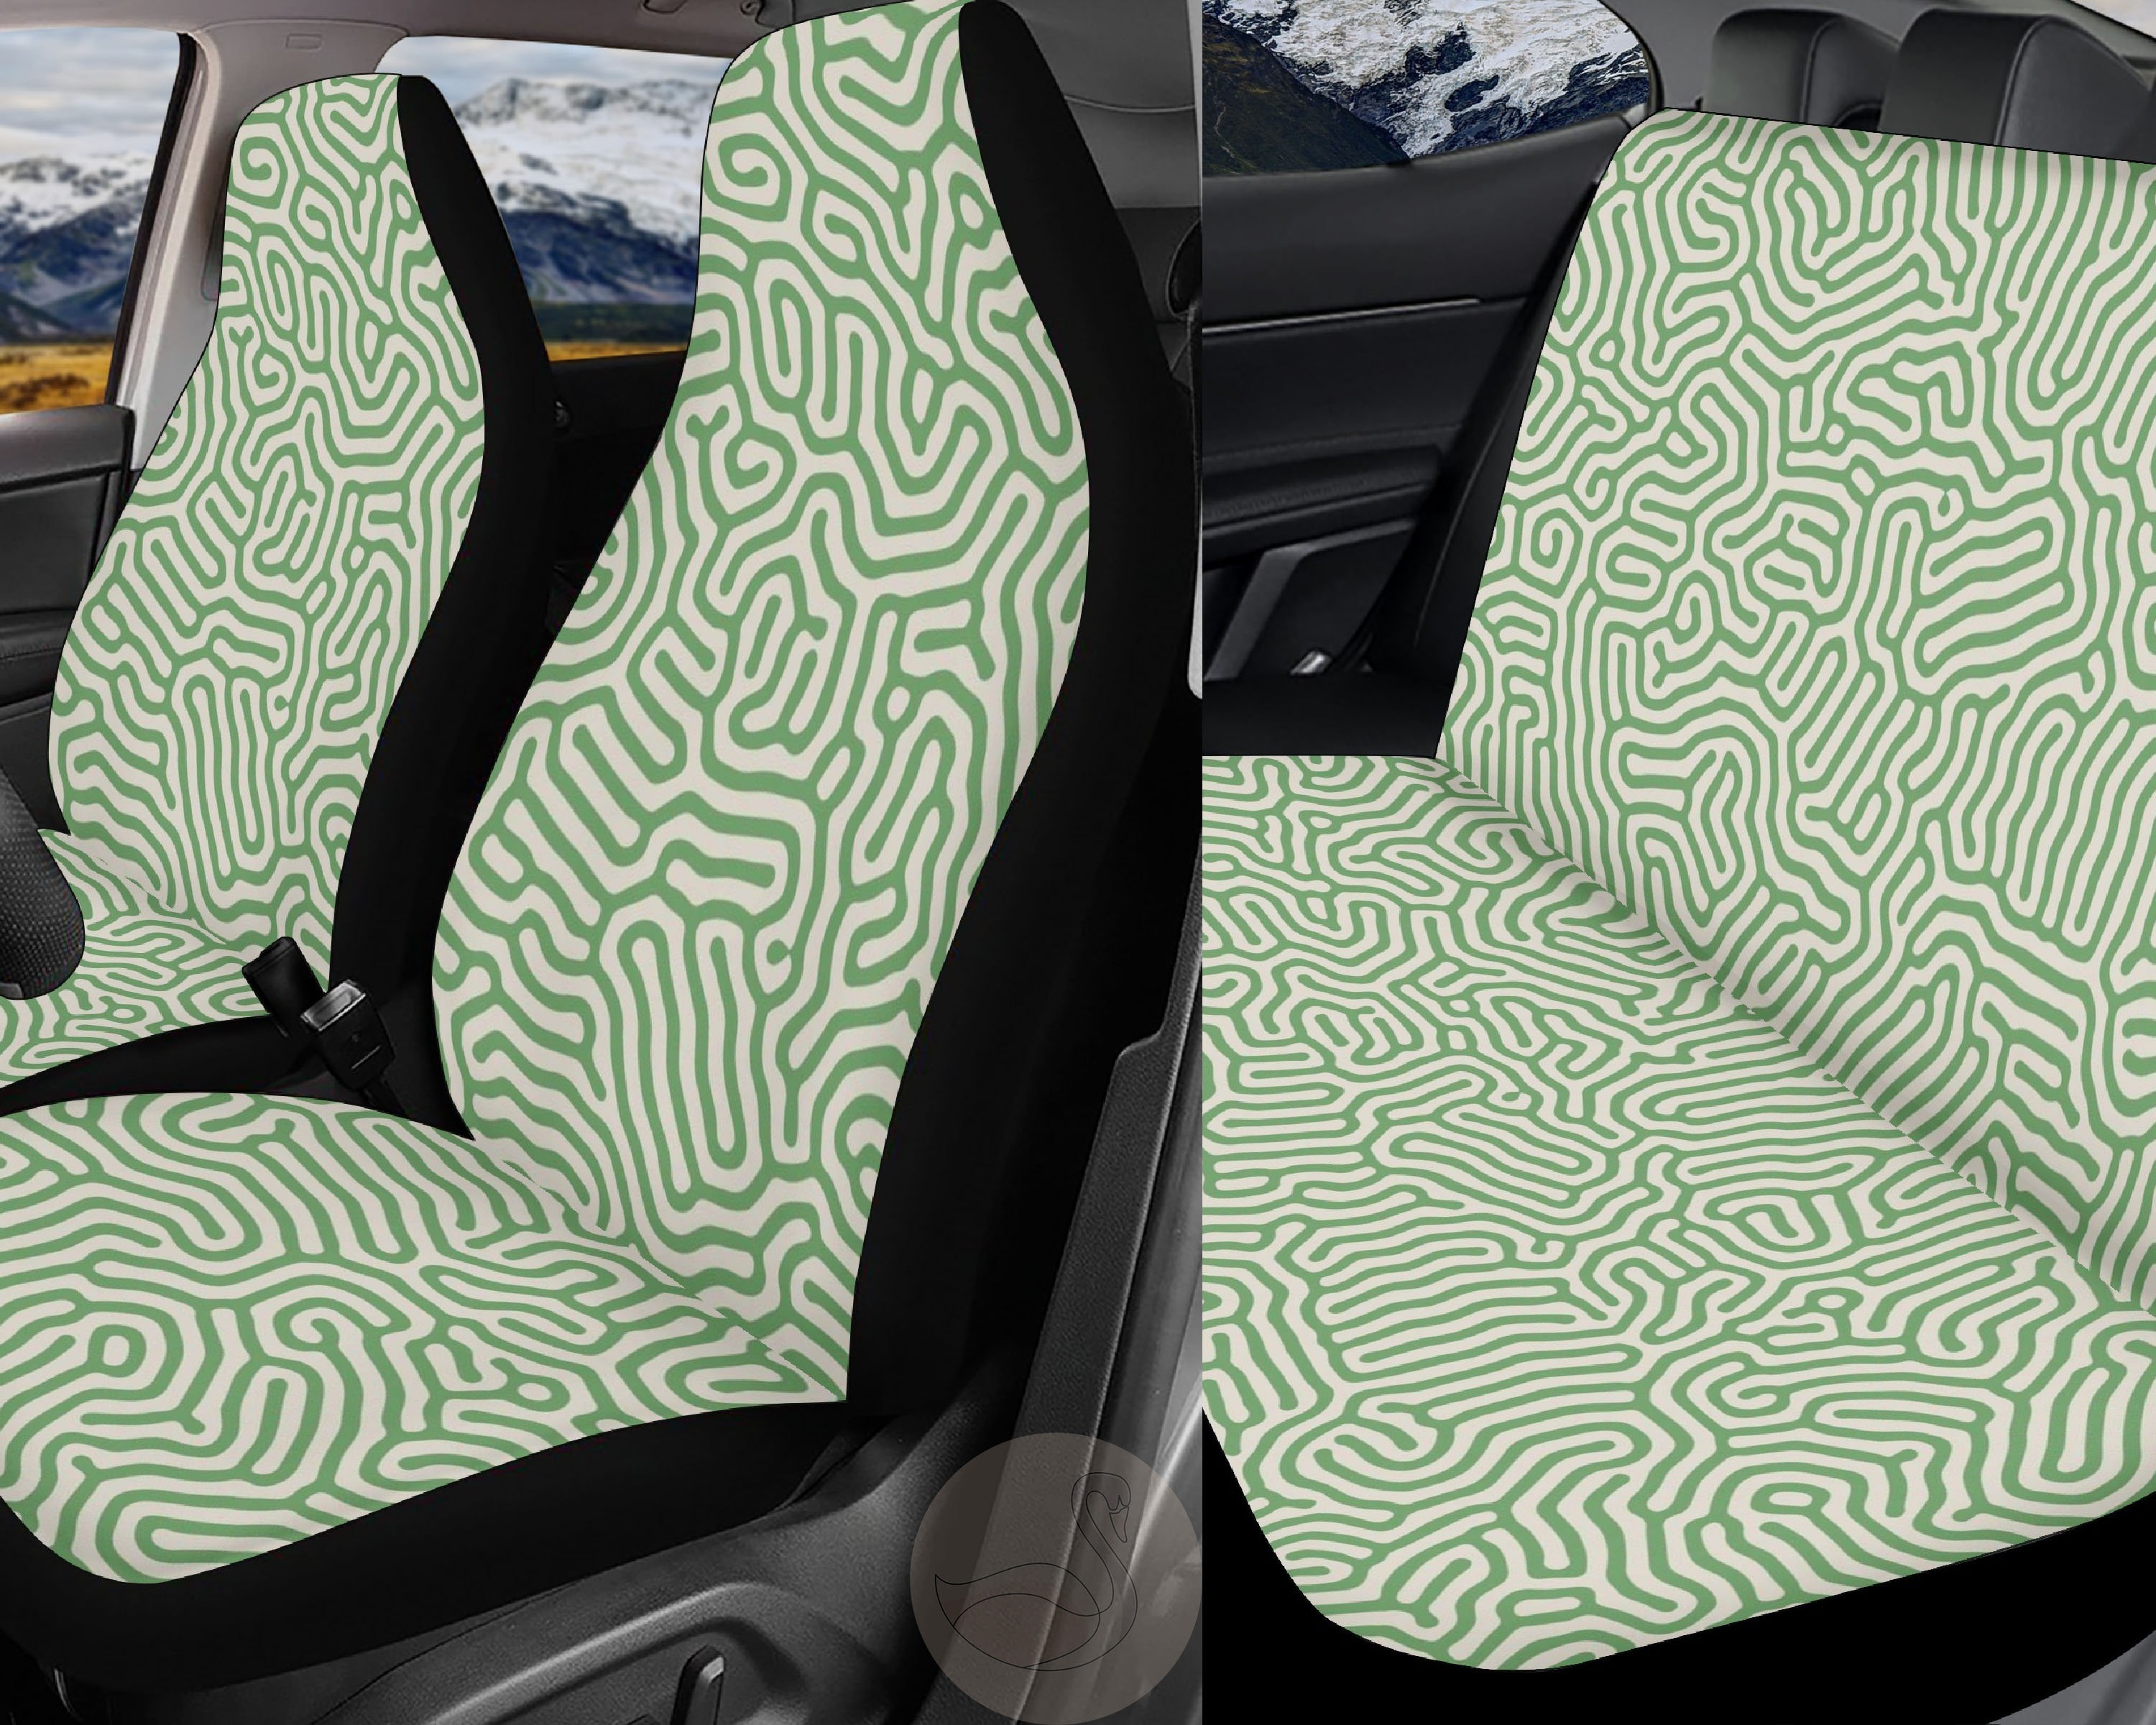 Vintage Green Car Seat Covers, Cute Seat Cover for Car Full Set, Front Back  Car Interior Decor, Seat Cover for Vehicle -  Ireland